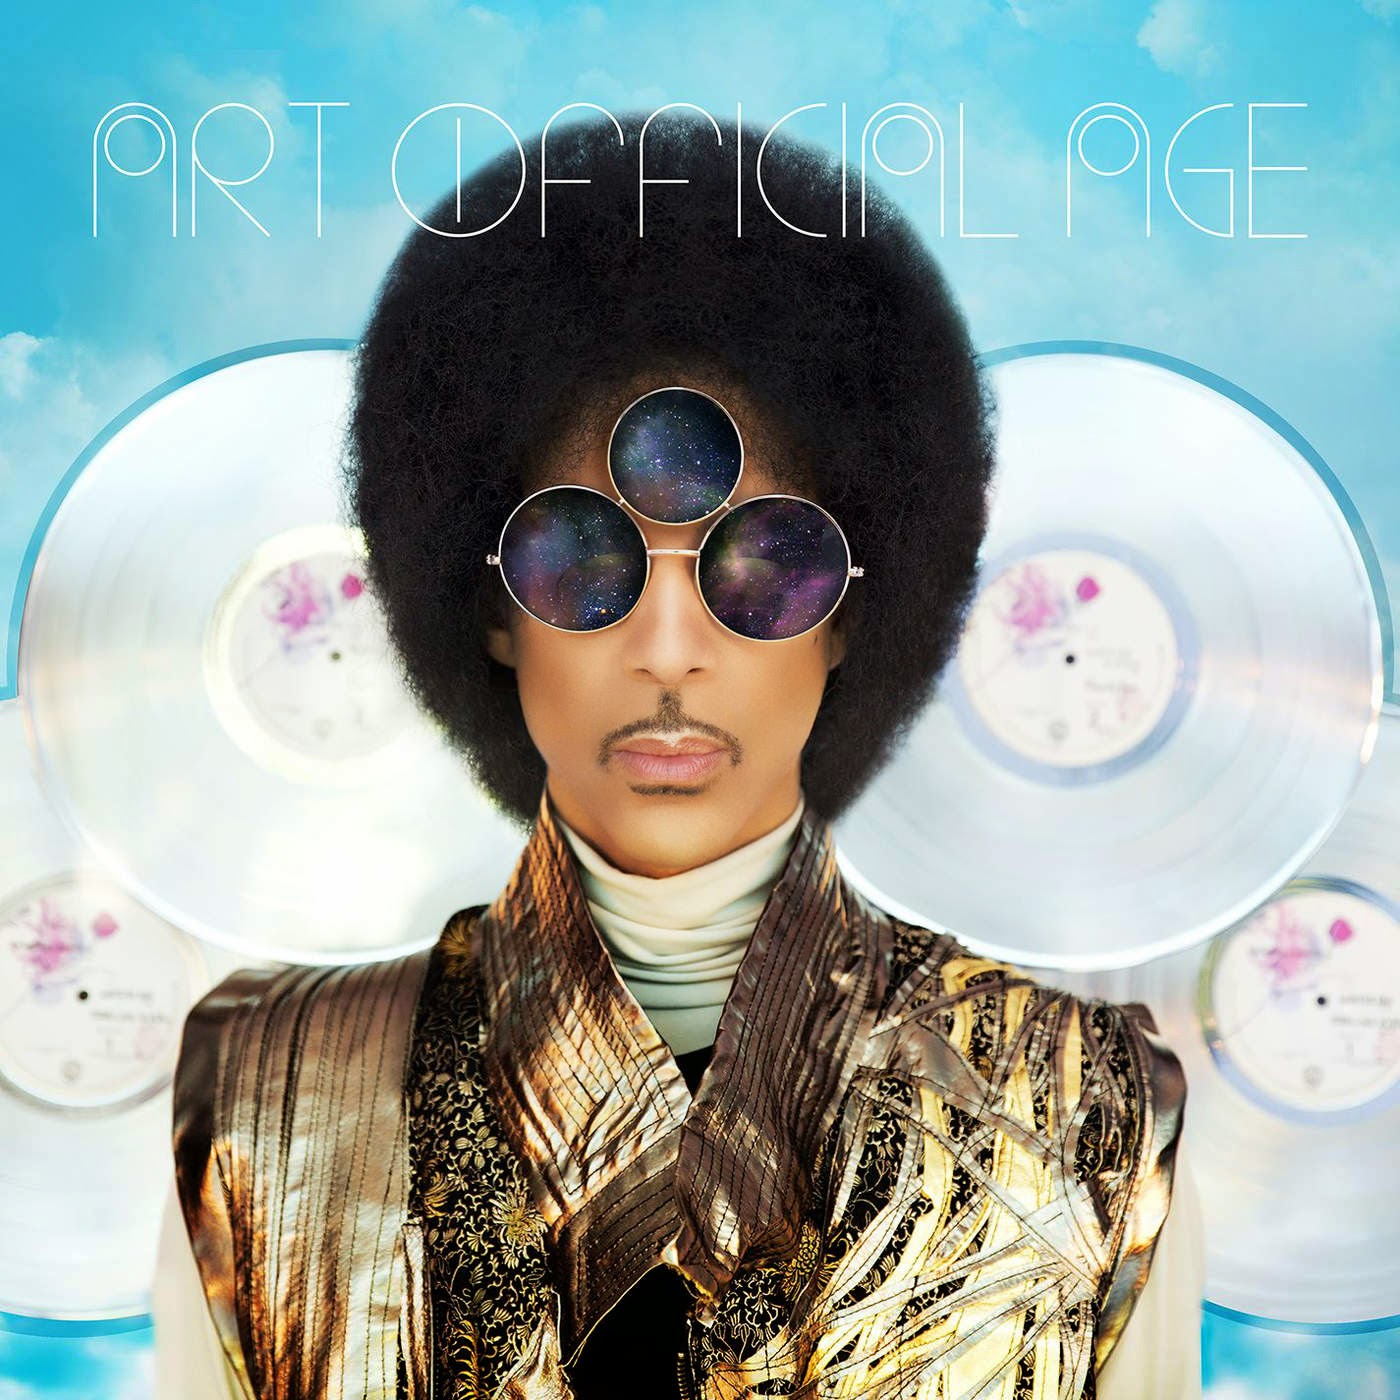 Record review: Prince plays catchup on ‘Art Official Age’